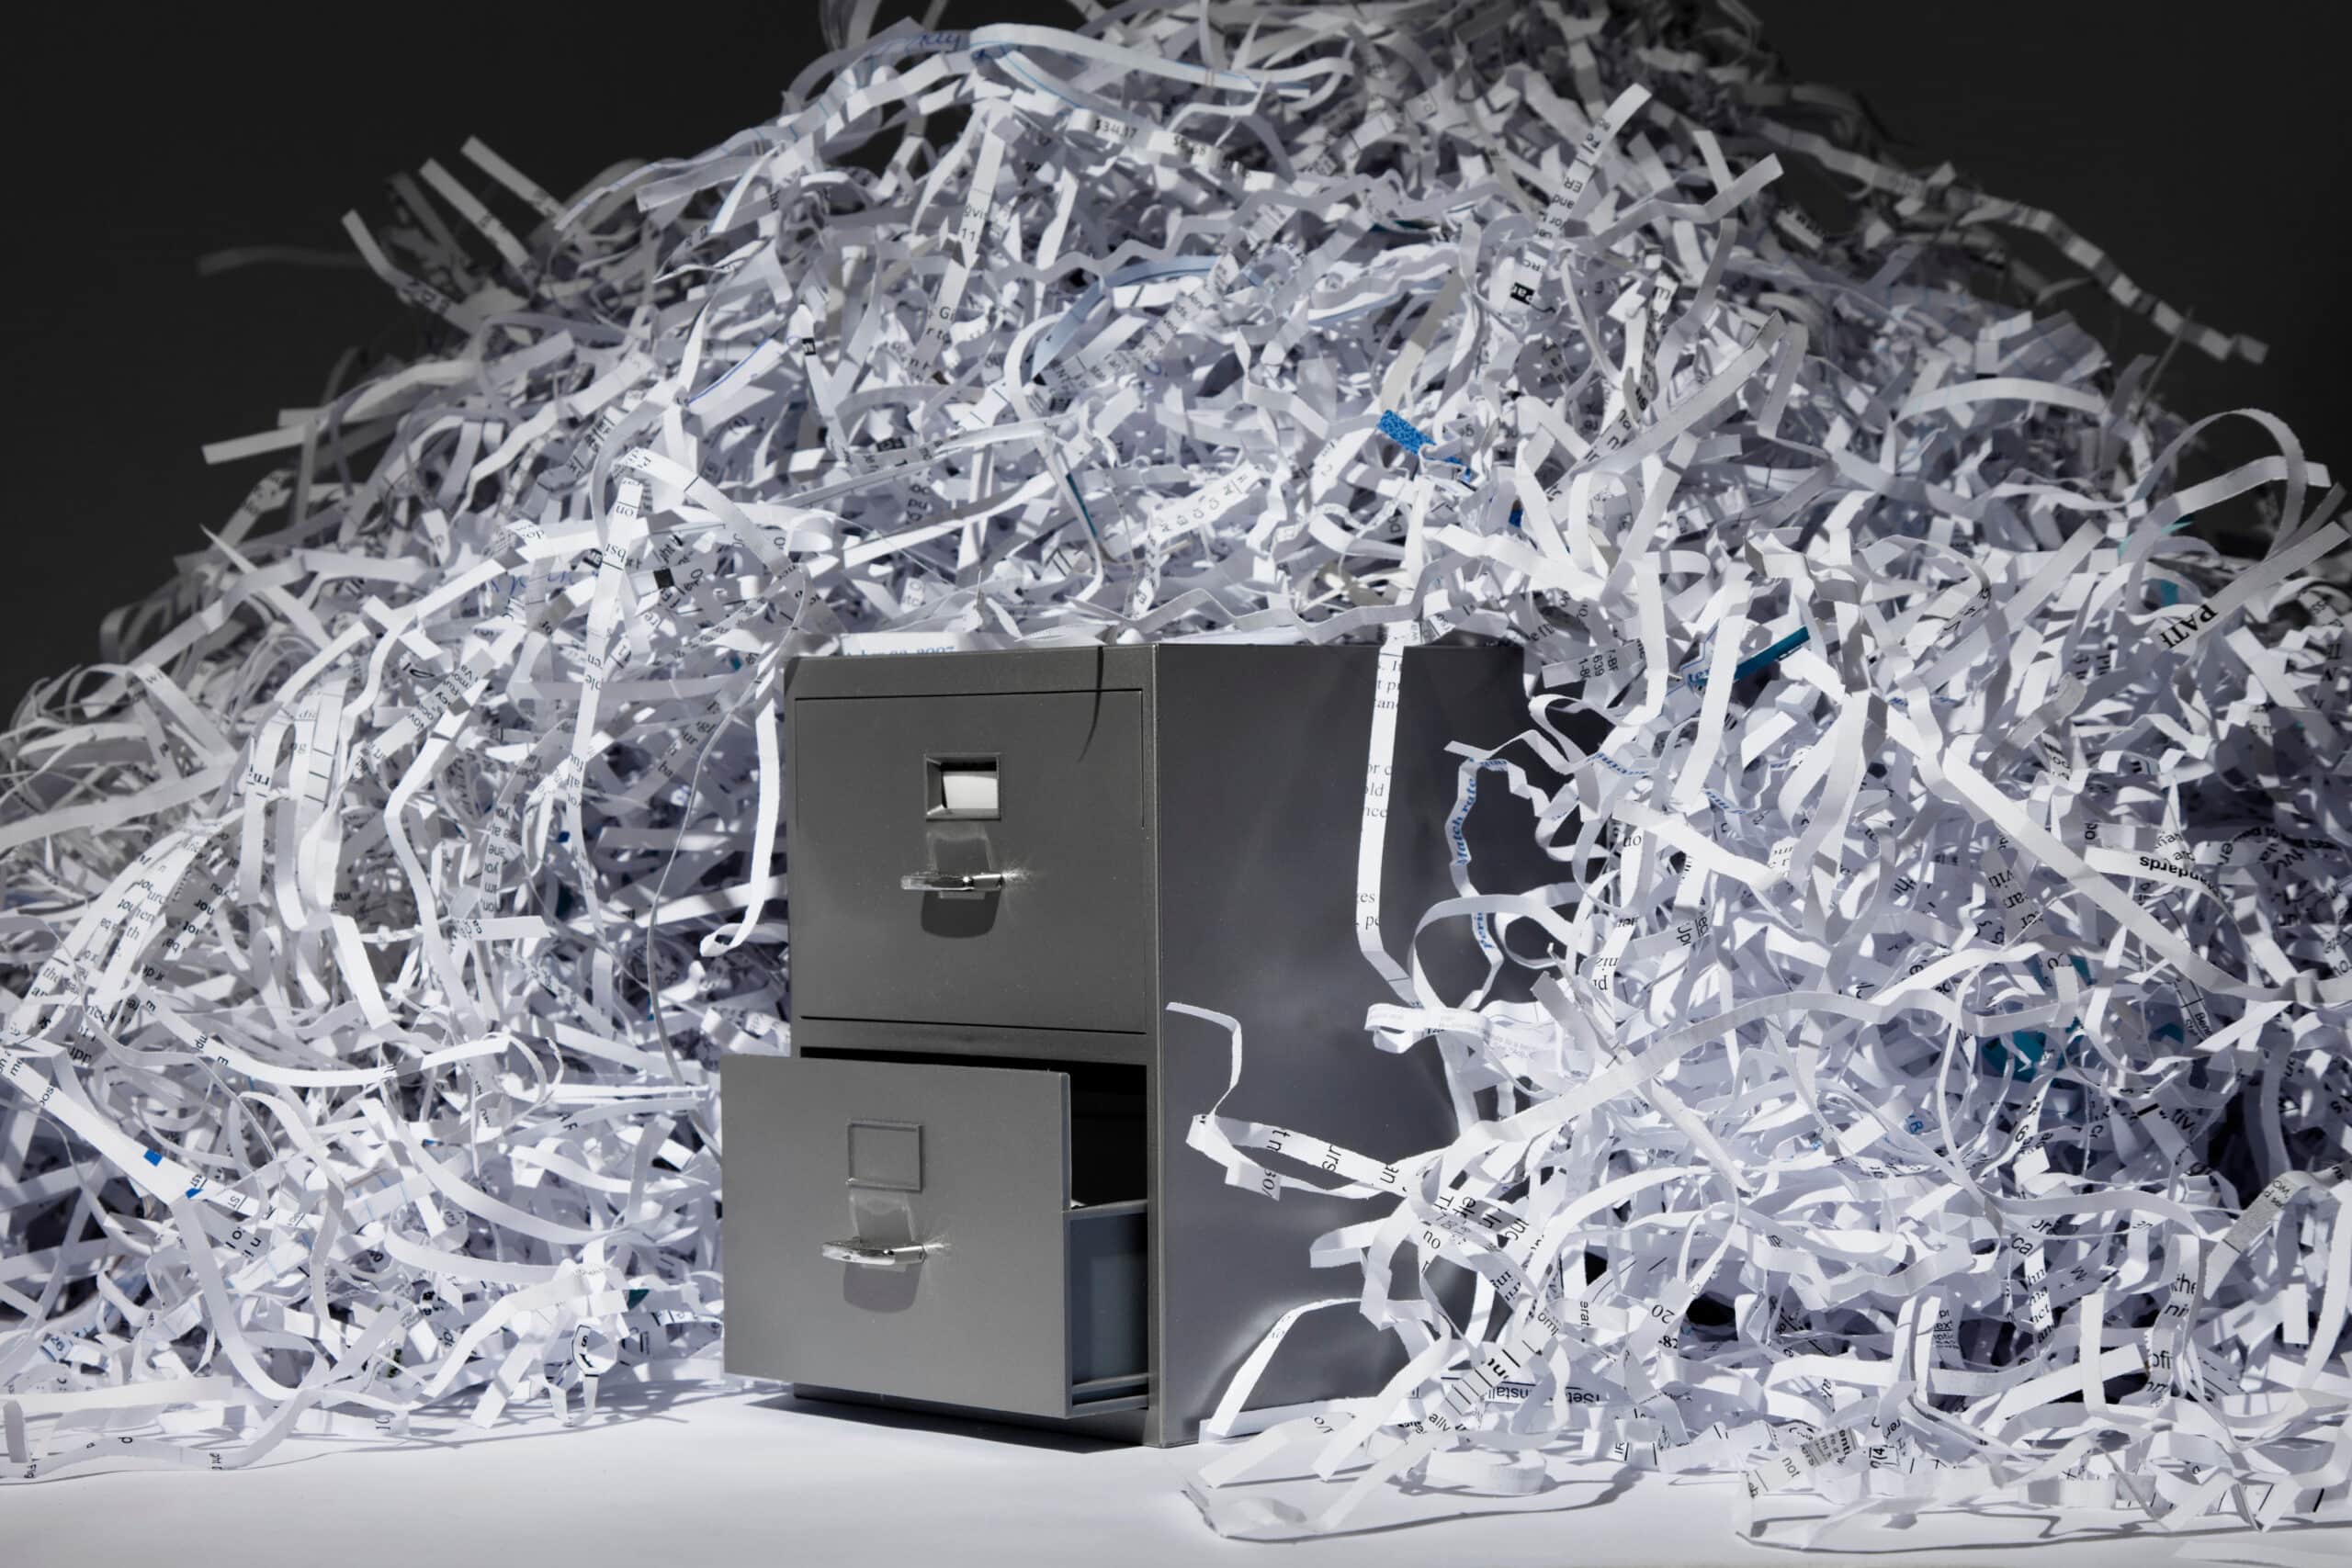 Are You in These Industries? You Need Shredding Services.